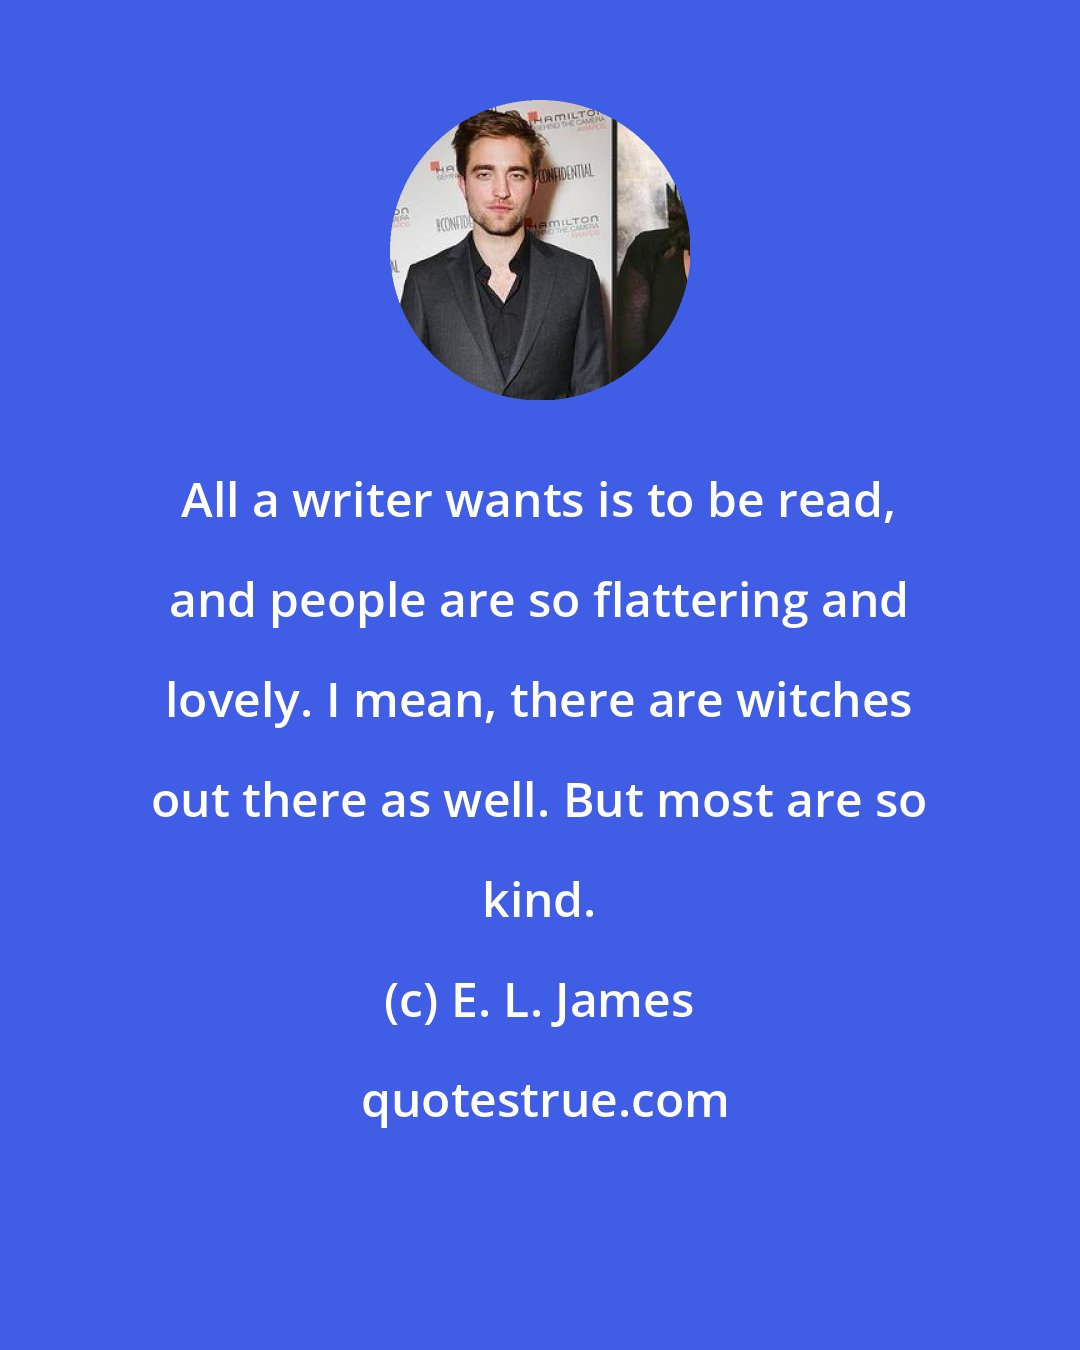 E. L. James: All a writer wants is to be read, and people are so flattering and lovely. I mean, there are witches out there as well. But most are so kind.